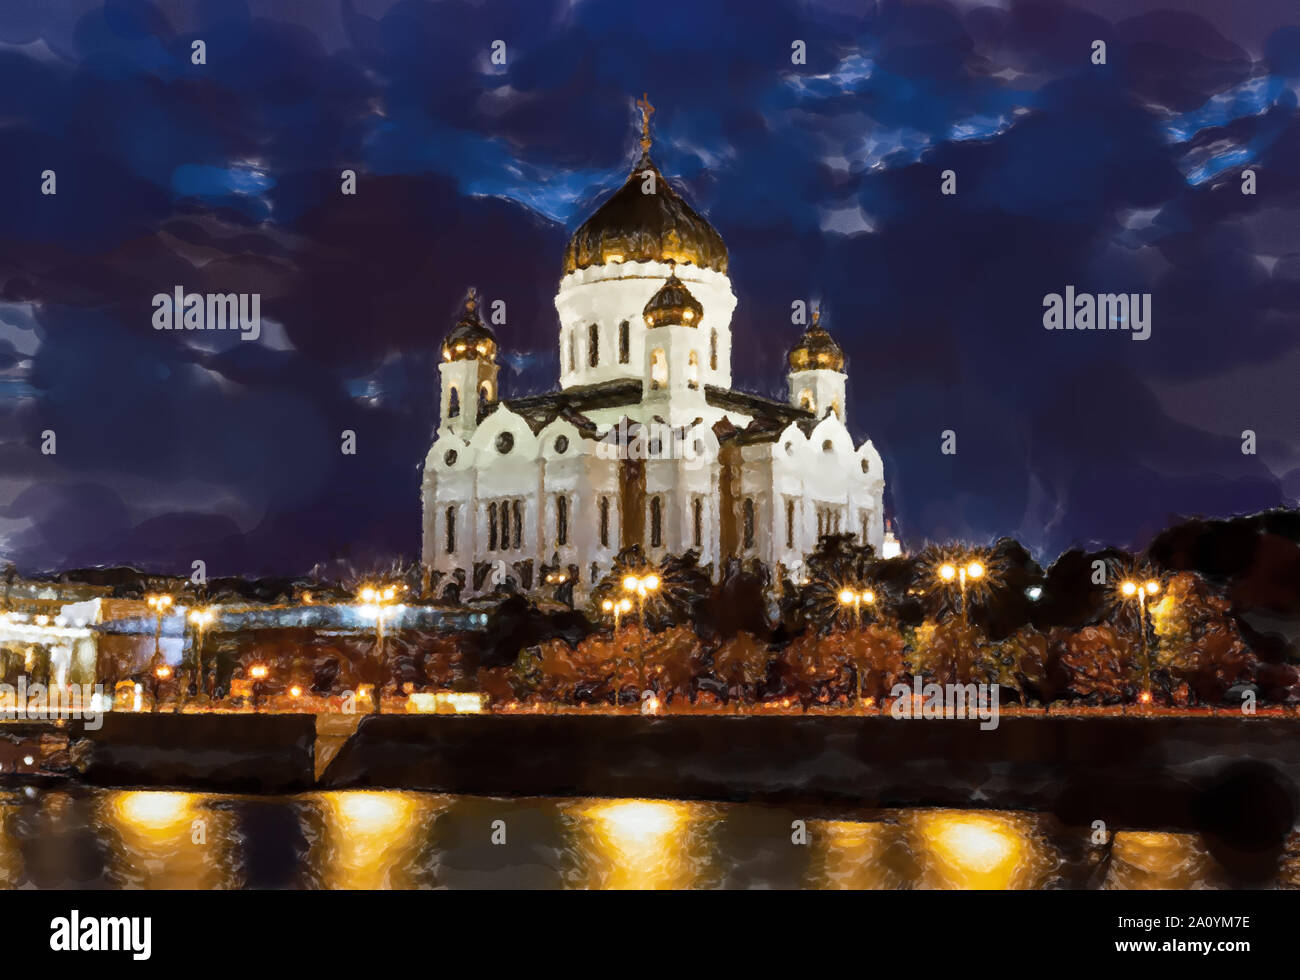 Illuminated Cathedral of Christ the Savior framed with old style street lights of Patriarchy Bridge at night. Watercolor style. Stock Photo